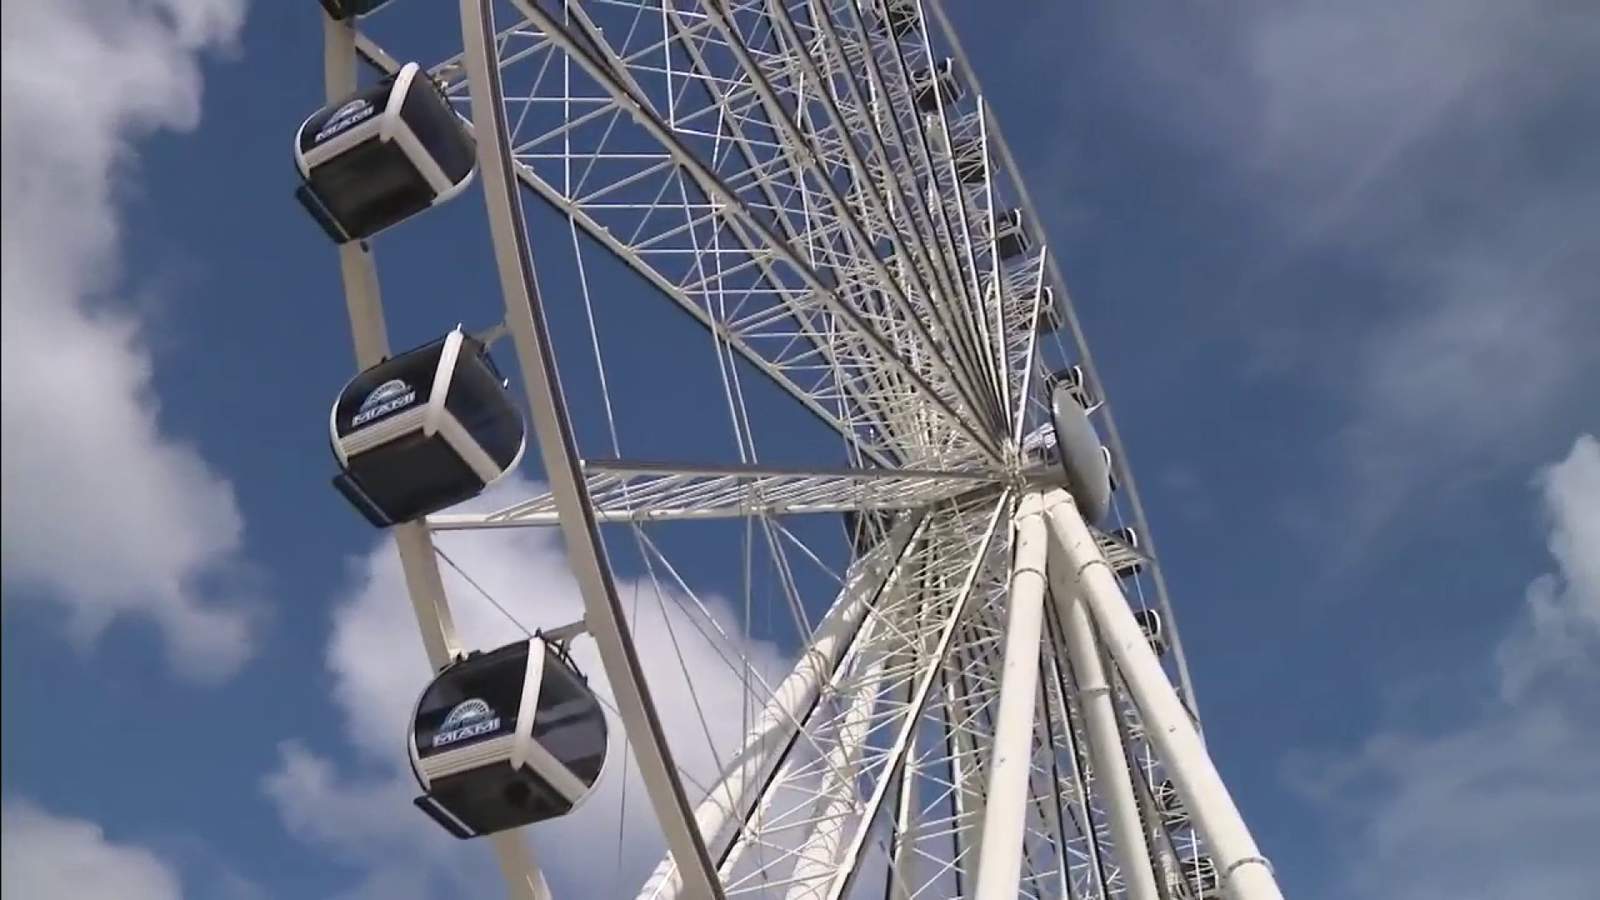 Skyviews Miami Observation Wheel opens to the public, bringing amazing views of downtown skyline